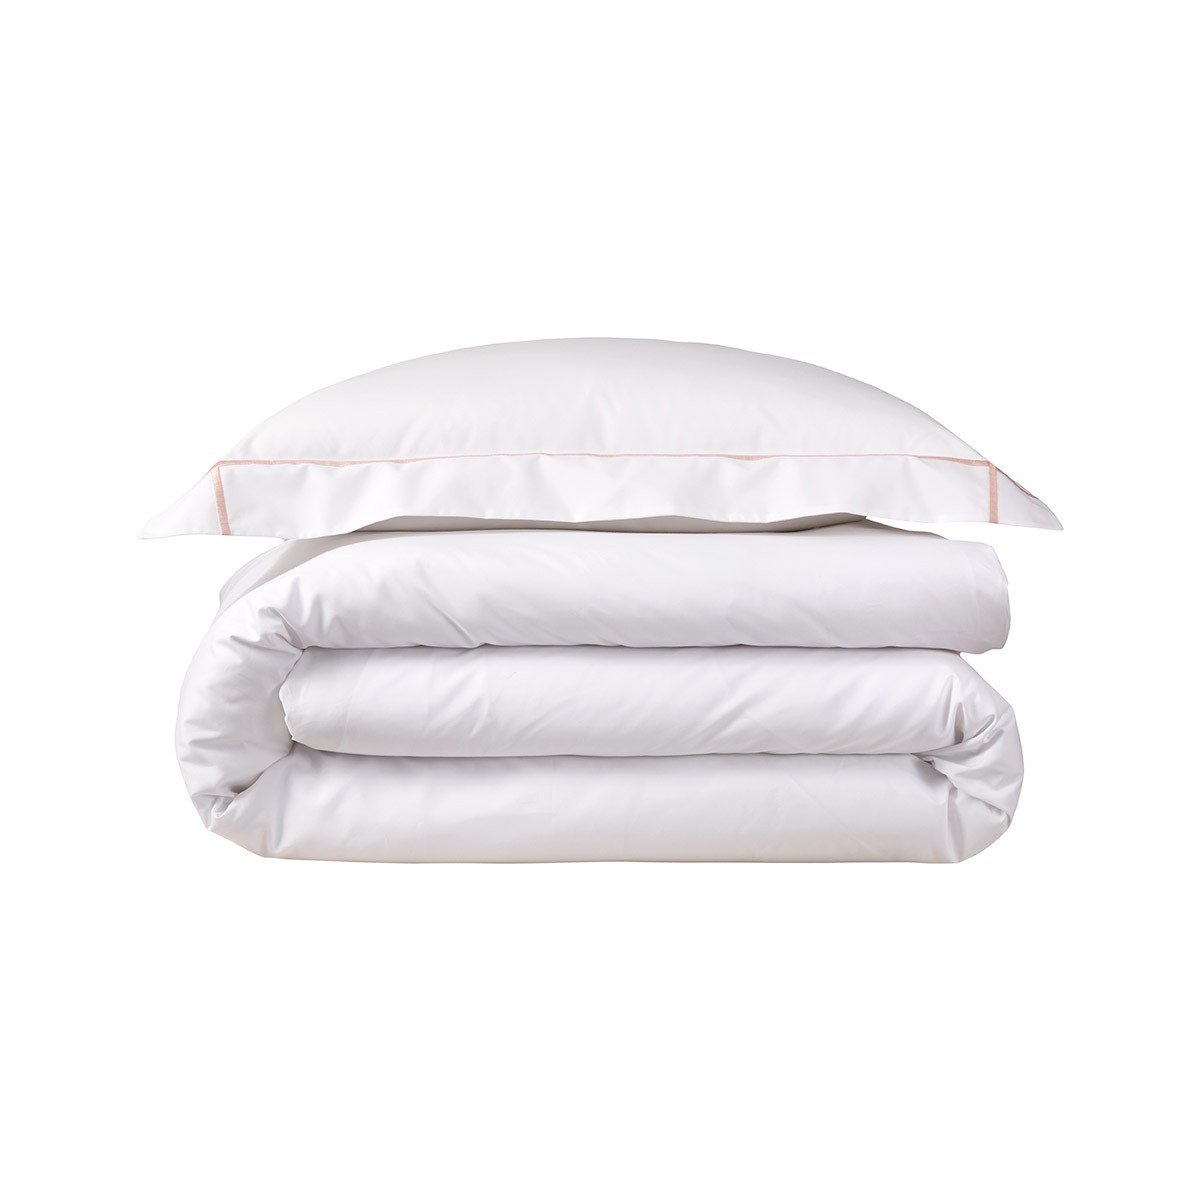 Yves Delorme Triomphe - Luxury 300 thread count Pillowcase - Yves Delorme